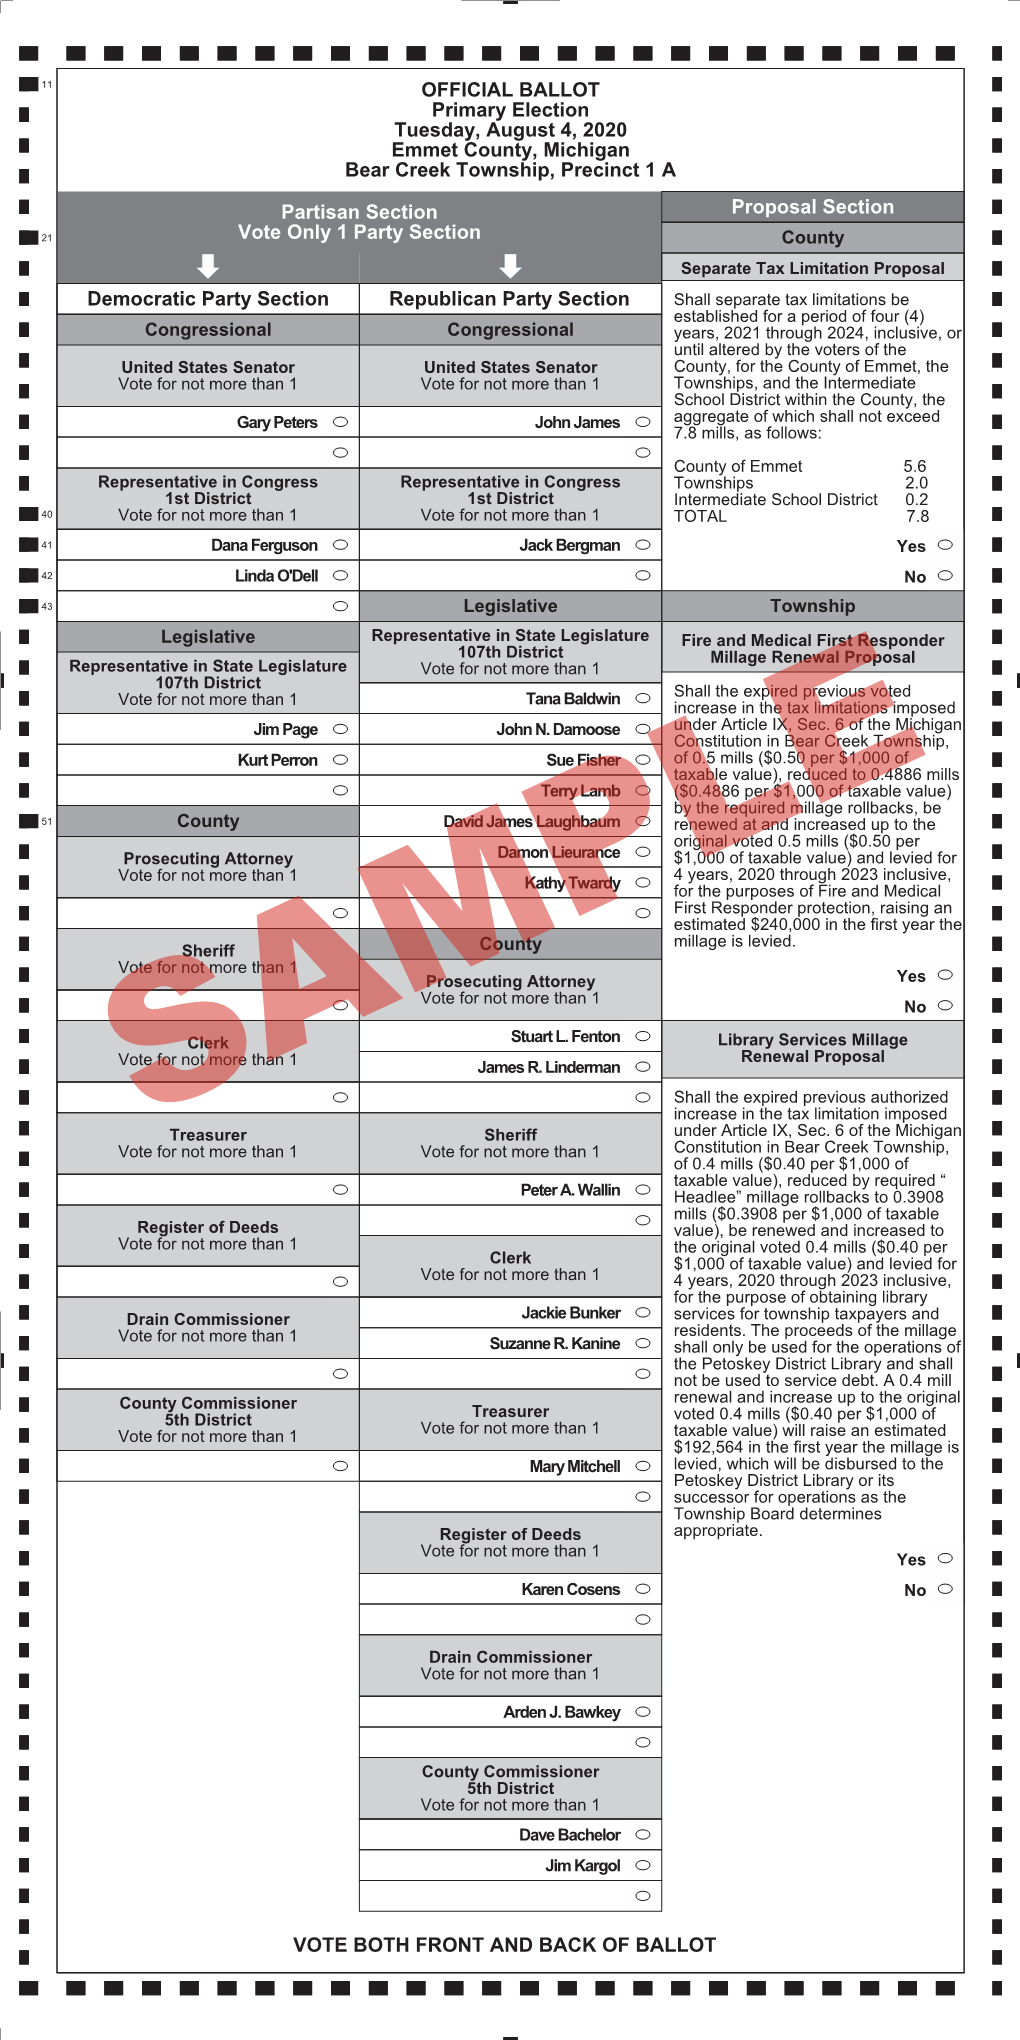 OFFICIAL BALLOT Primary Election Tuesday, August 4, 2020 Emmet County, Michigan Bear Creek Township, Precinct 1 A